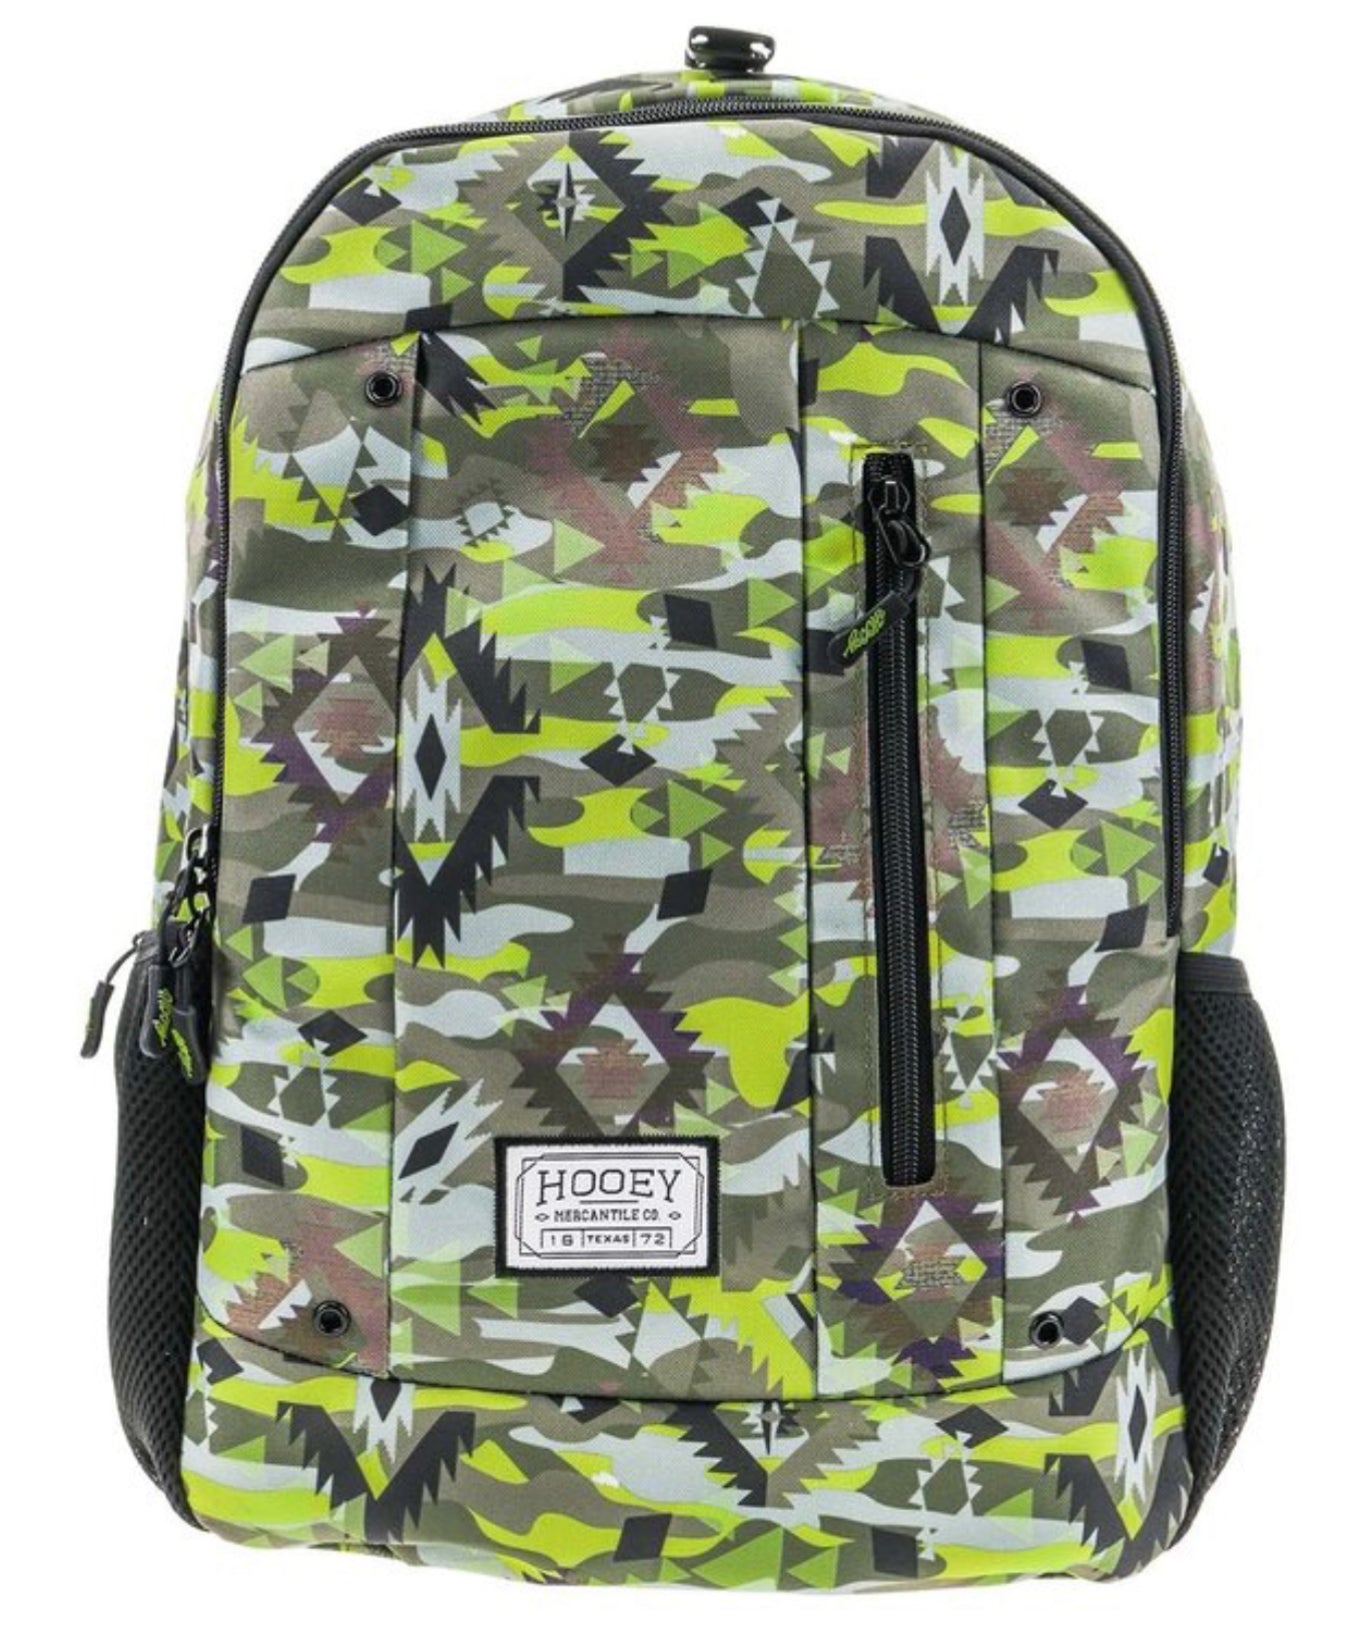 HOOEY “ROCKSTAR” BACKPACK, CAMO PATTERN BODY WITH BLACK ACCENTS